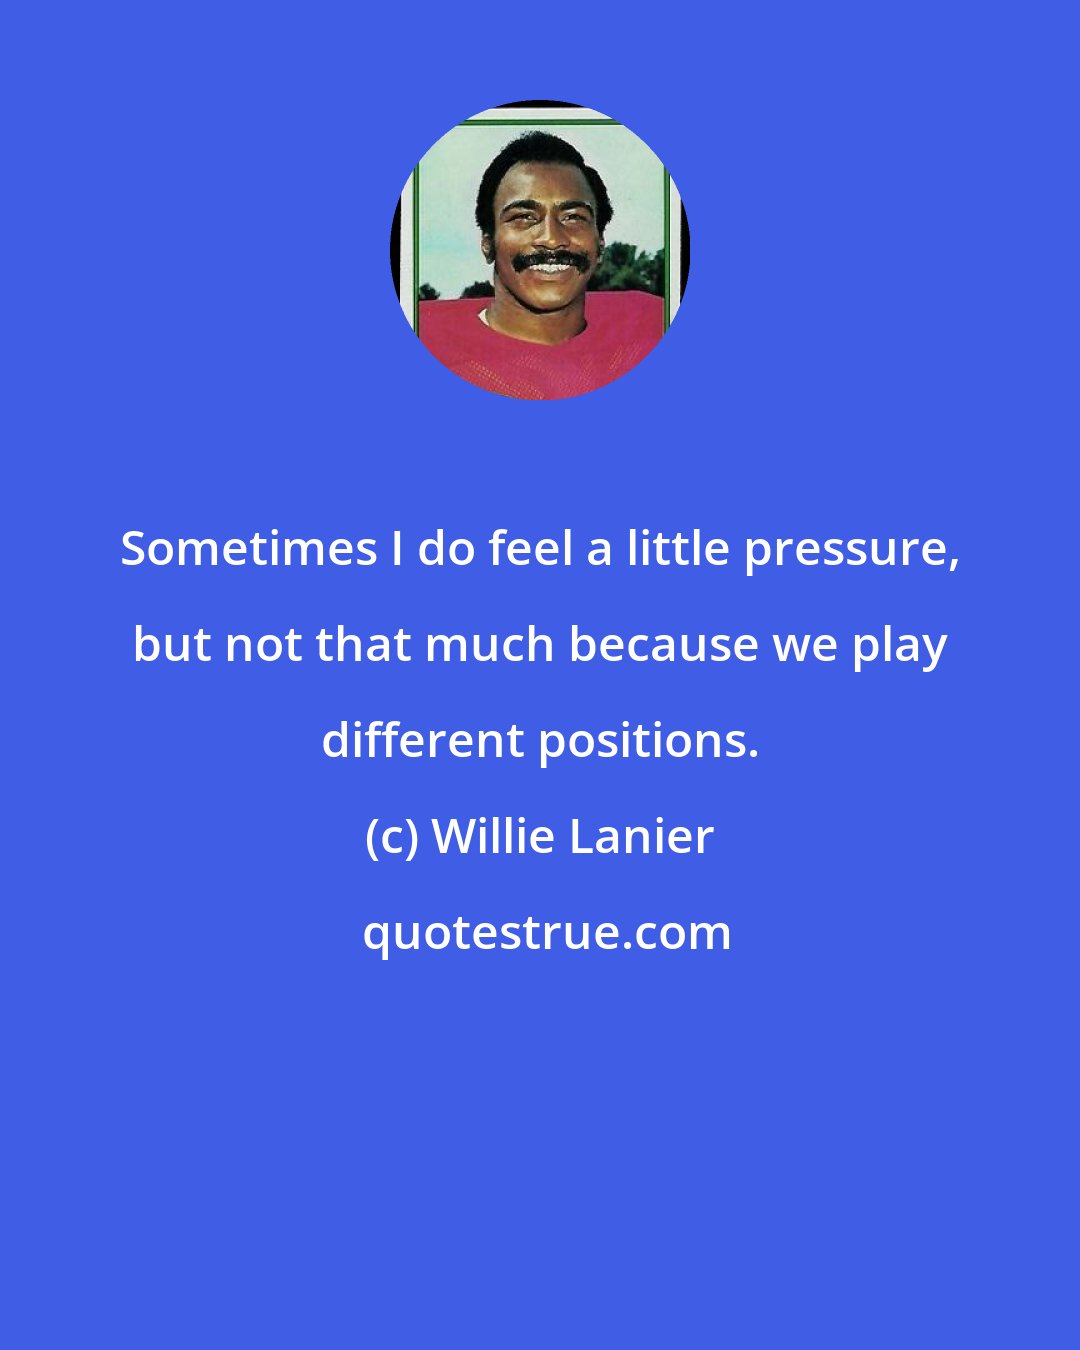 Willie Lanier: Sometimes I do feel a little pressure, but not that much because we play different positions.